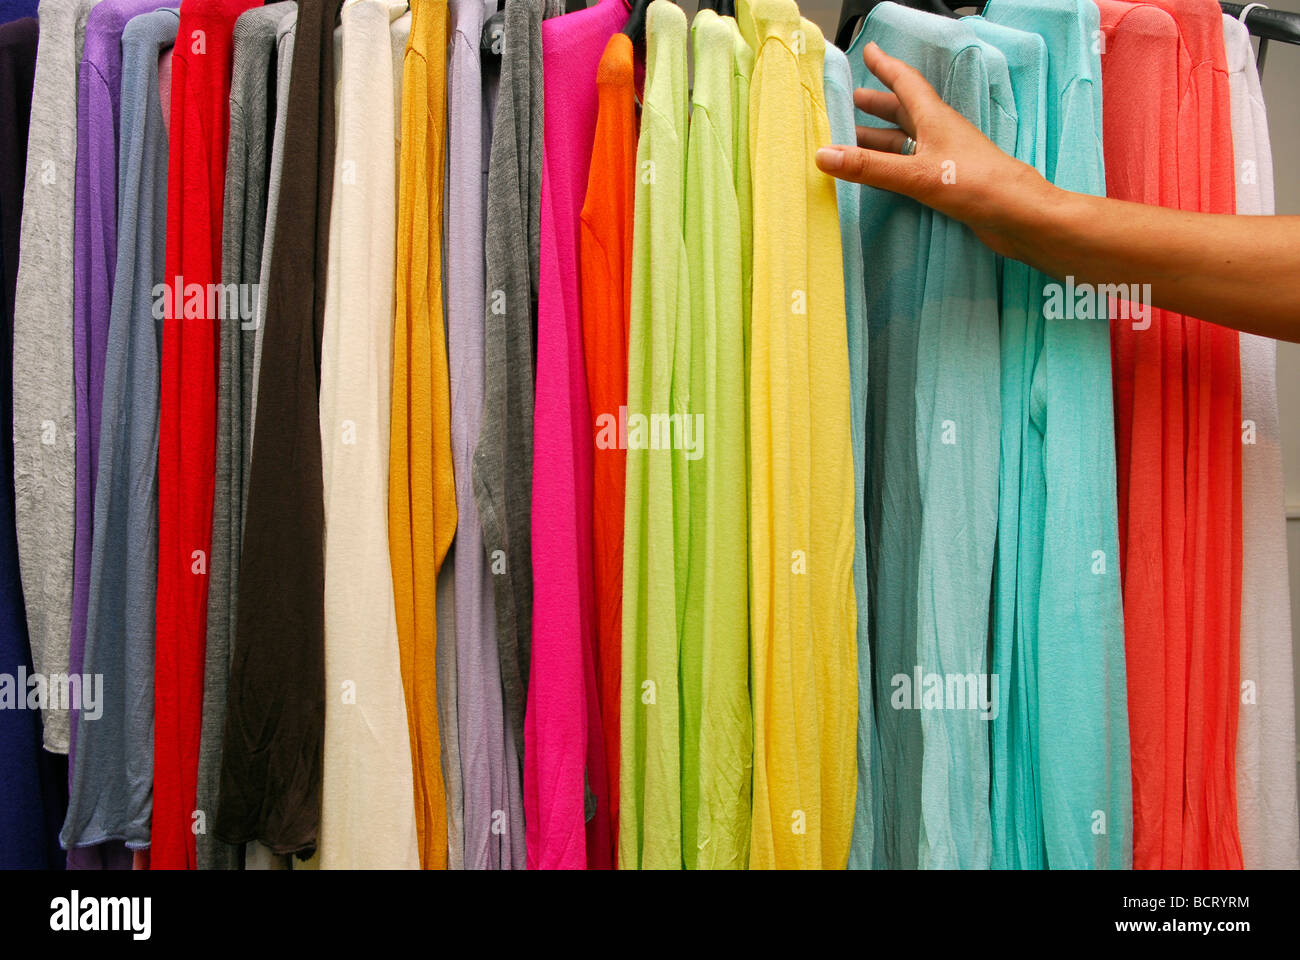 Woman looking for garment in women's clothes store, Haslemere, Surrey UK. Stock Photo